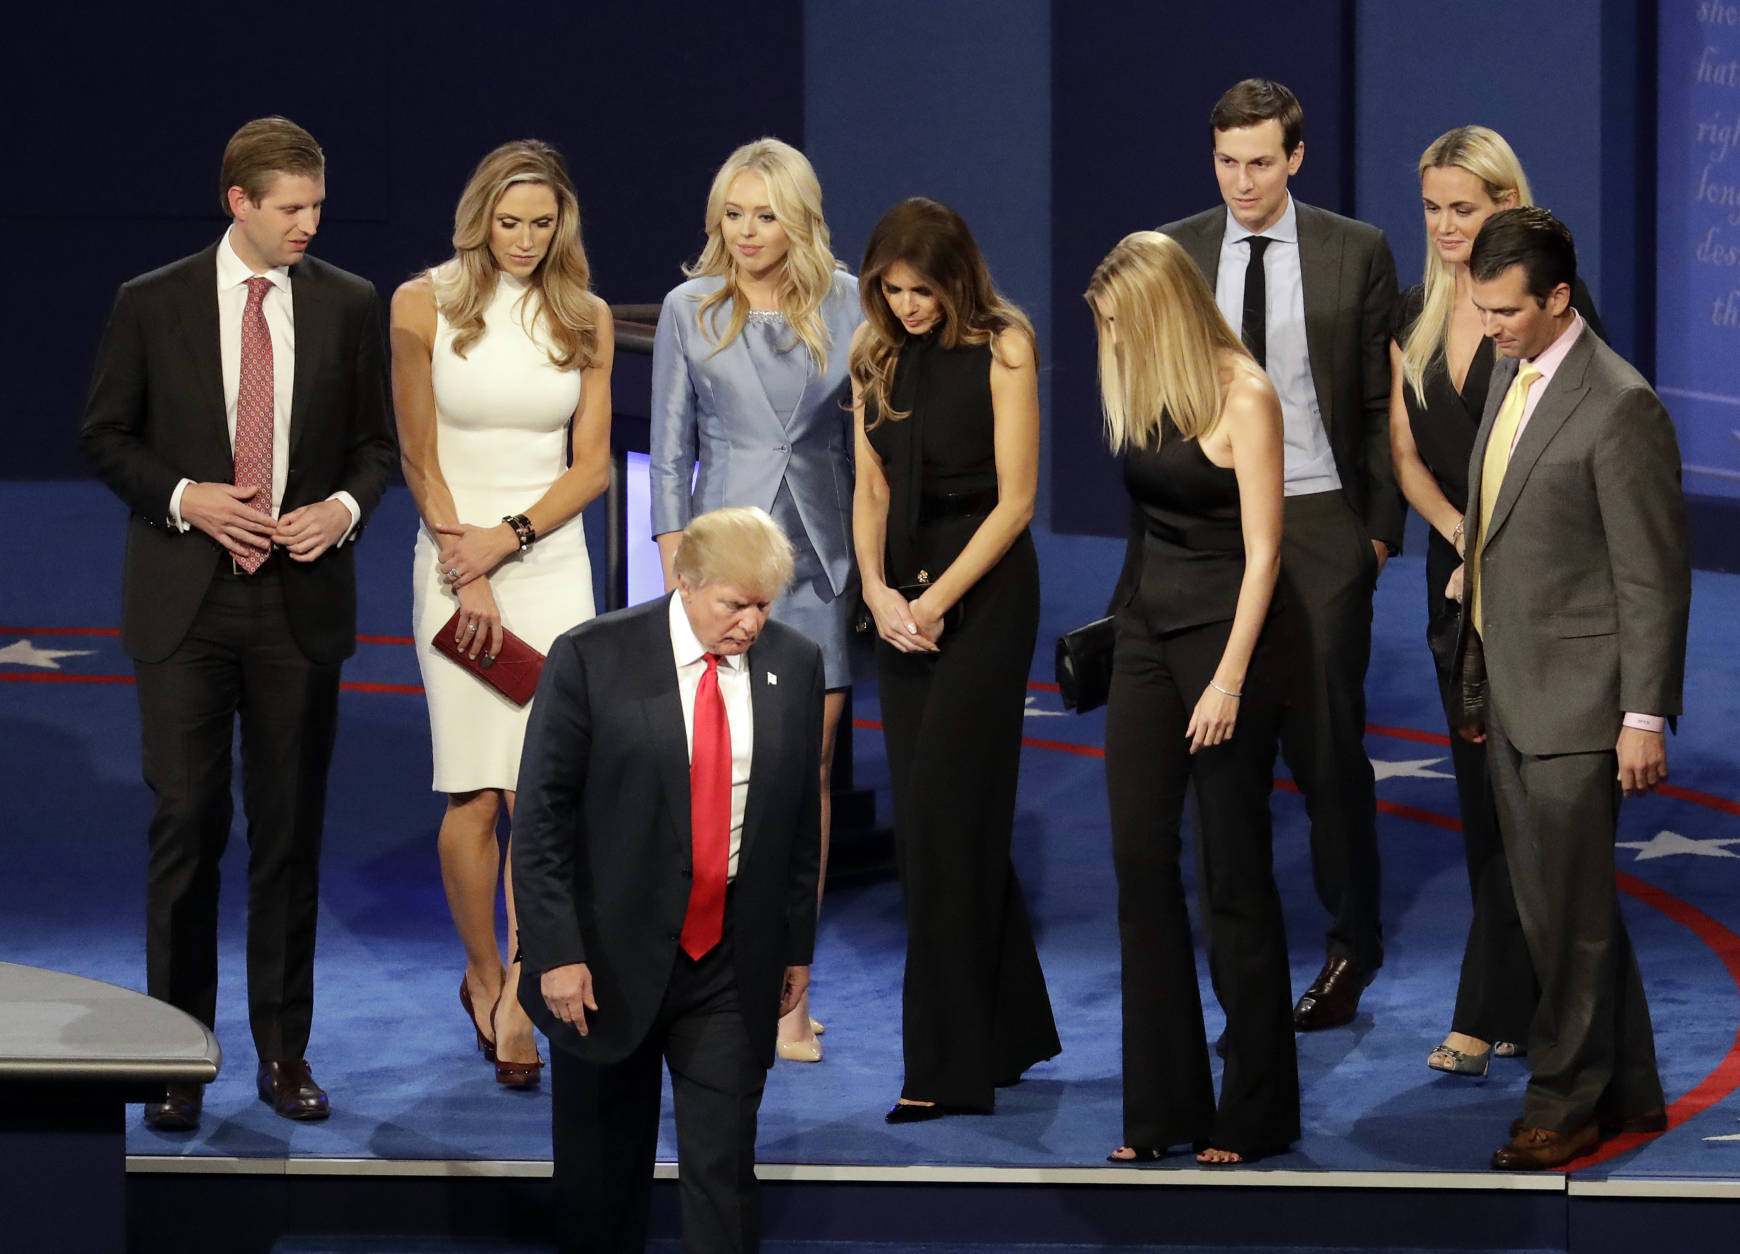 Republican presidential nominee Donald Trump walks off the stage with his family after debating Democratic presidential nominee Hillary Clinton at the end of the third presidential debate at UNLV in Las Vegas, Wednesday, Oct. 19, 2016. (AP Photo/Julio Cortez)